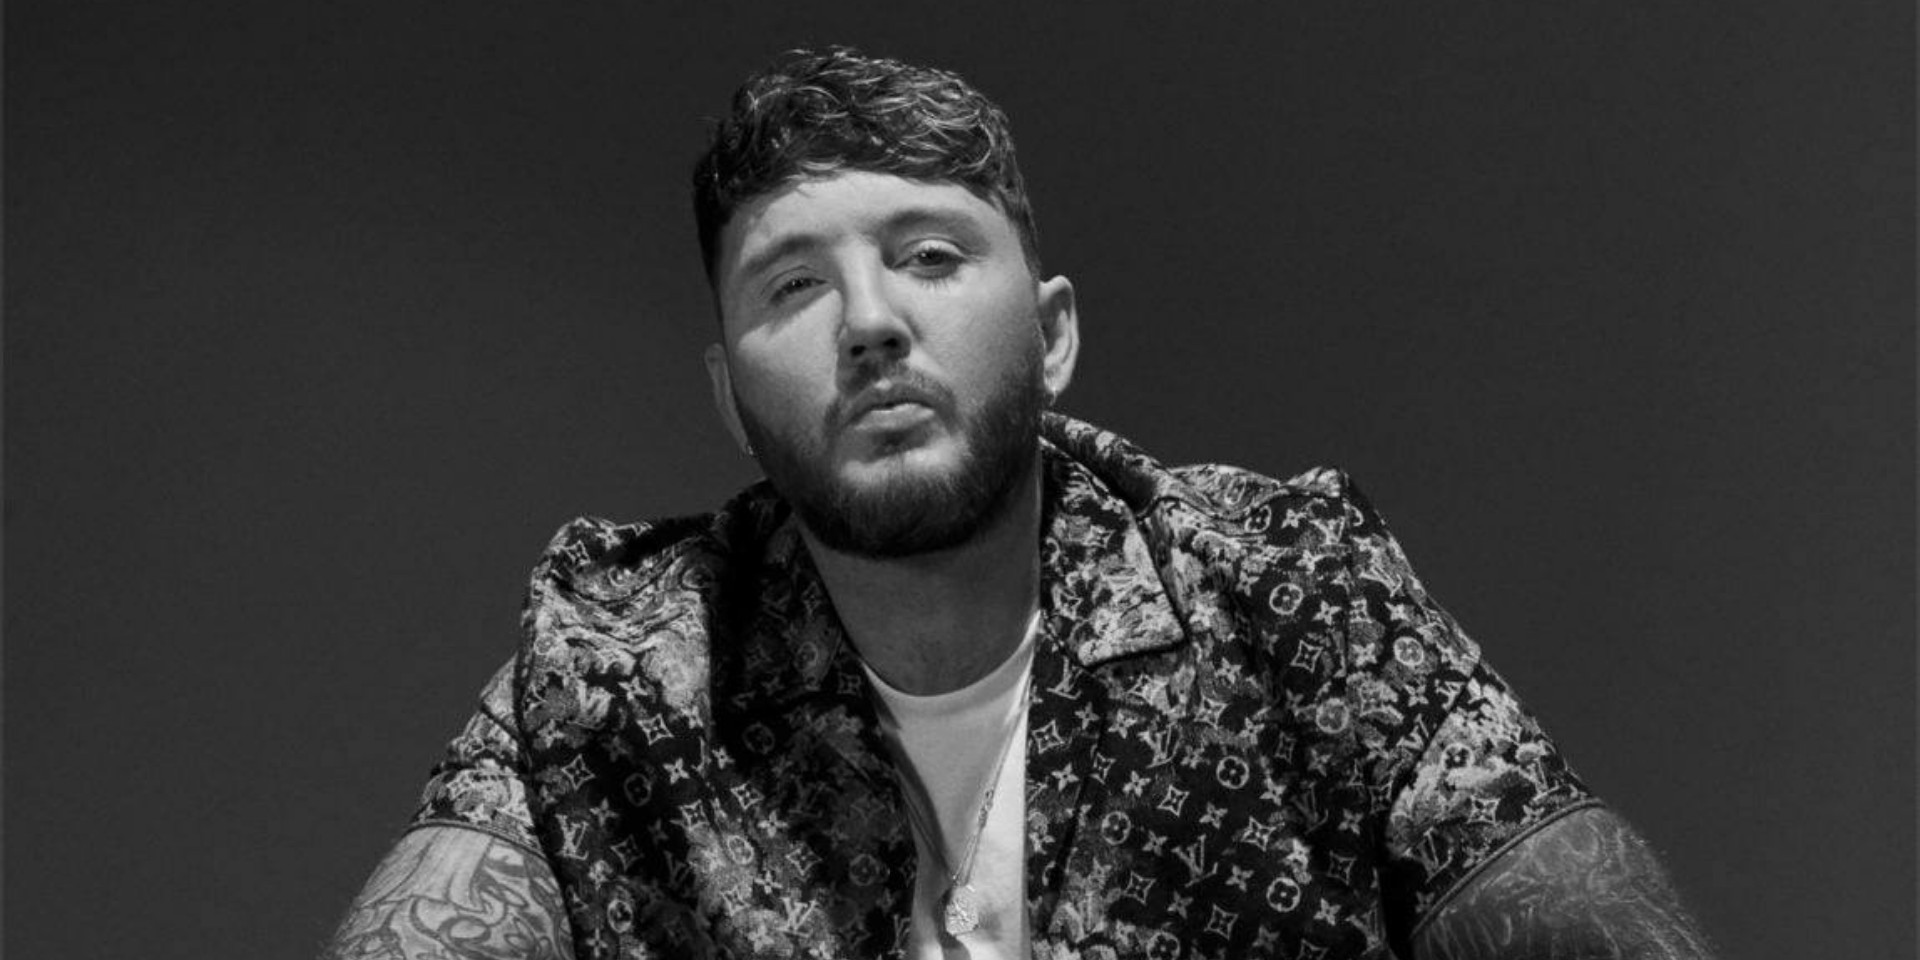 James Arthur talks about his new album 'It'll All Make Sense In The End', playing at the Royal Albert Hall, and the story behind 'Emily'